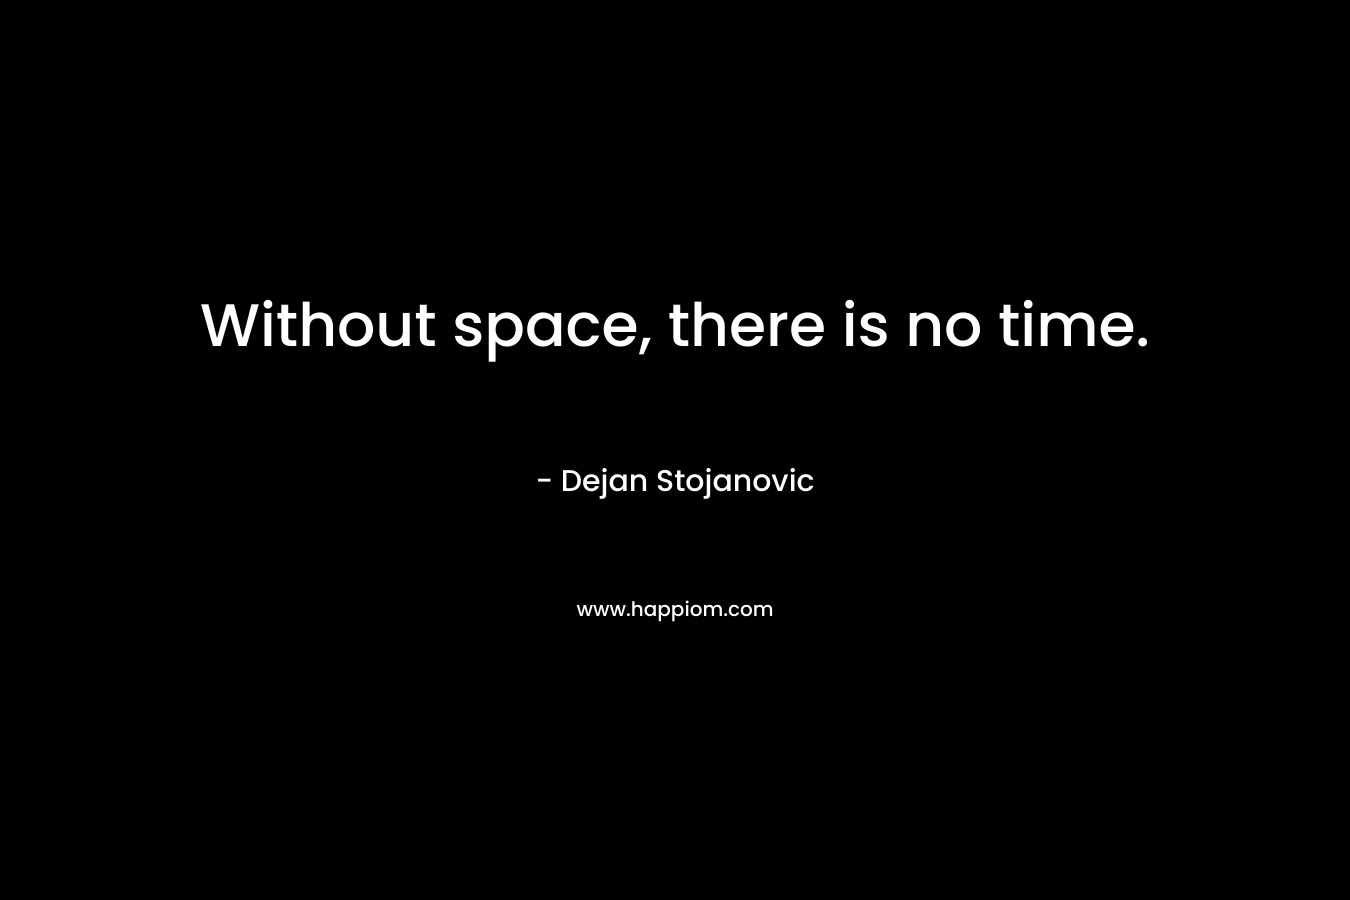 Without space, there is no time.